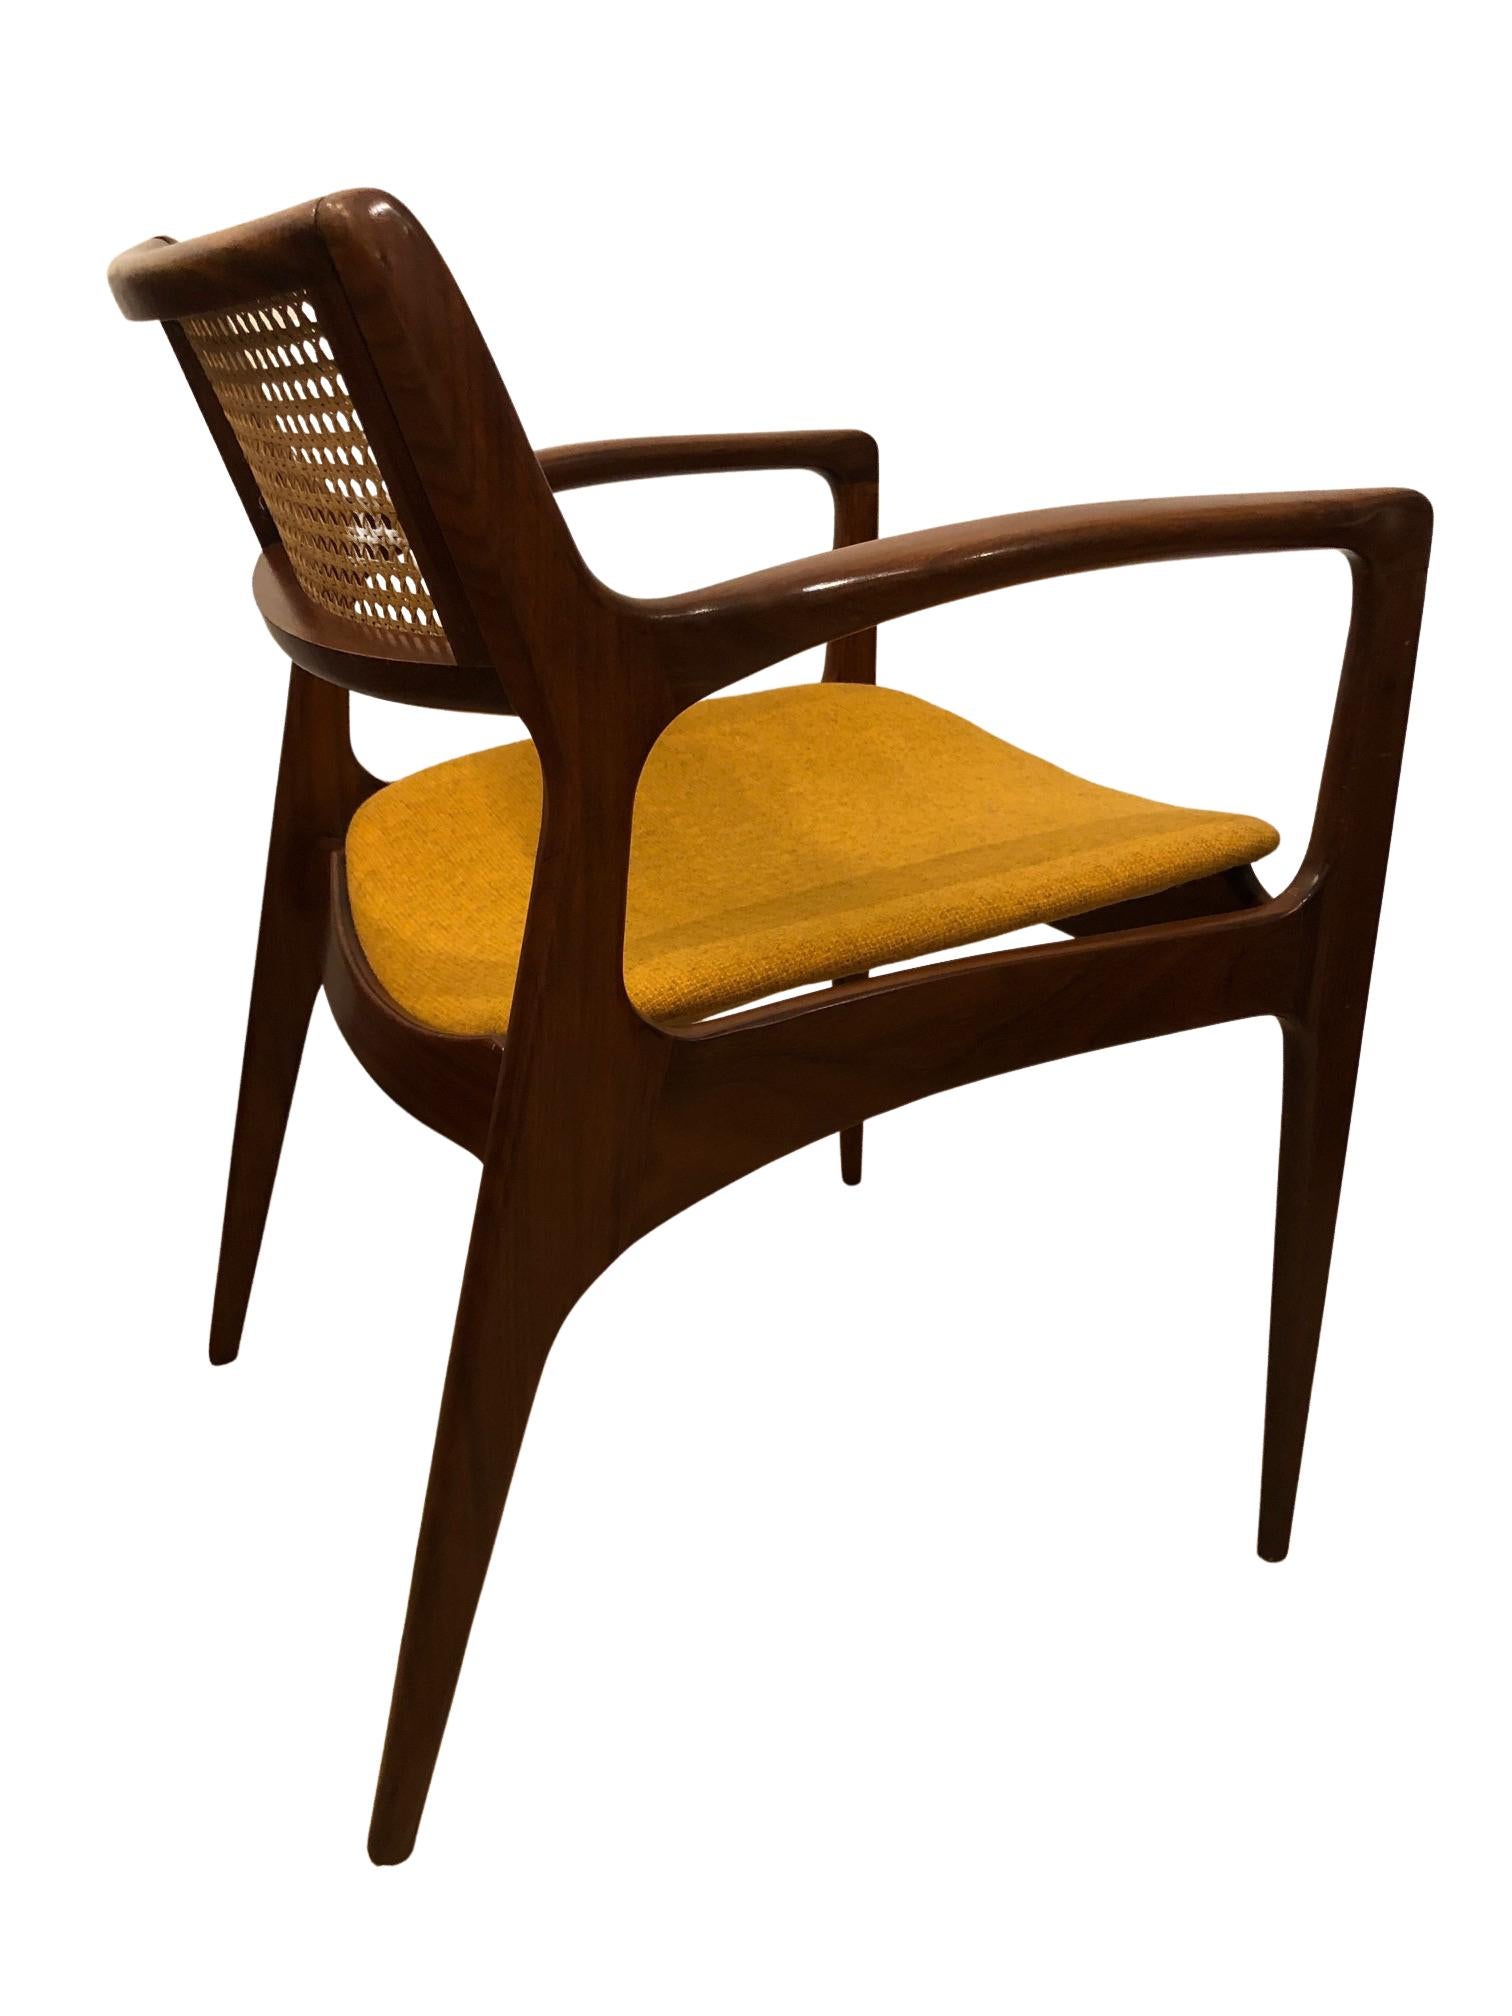 Hand-Crafted Mid-Century GFM-120 Chair, by Edmund Homa in Solid Wood and Wool, 1960s For Sale